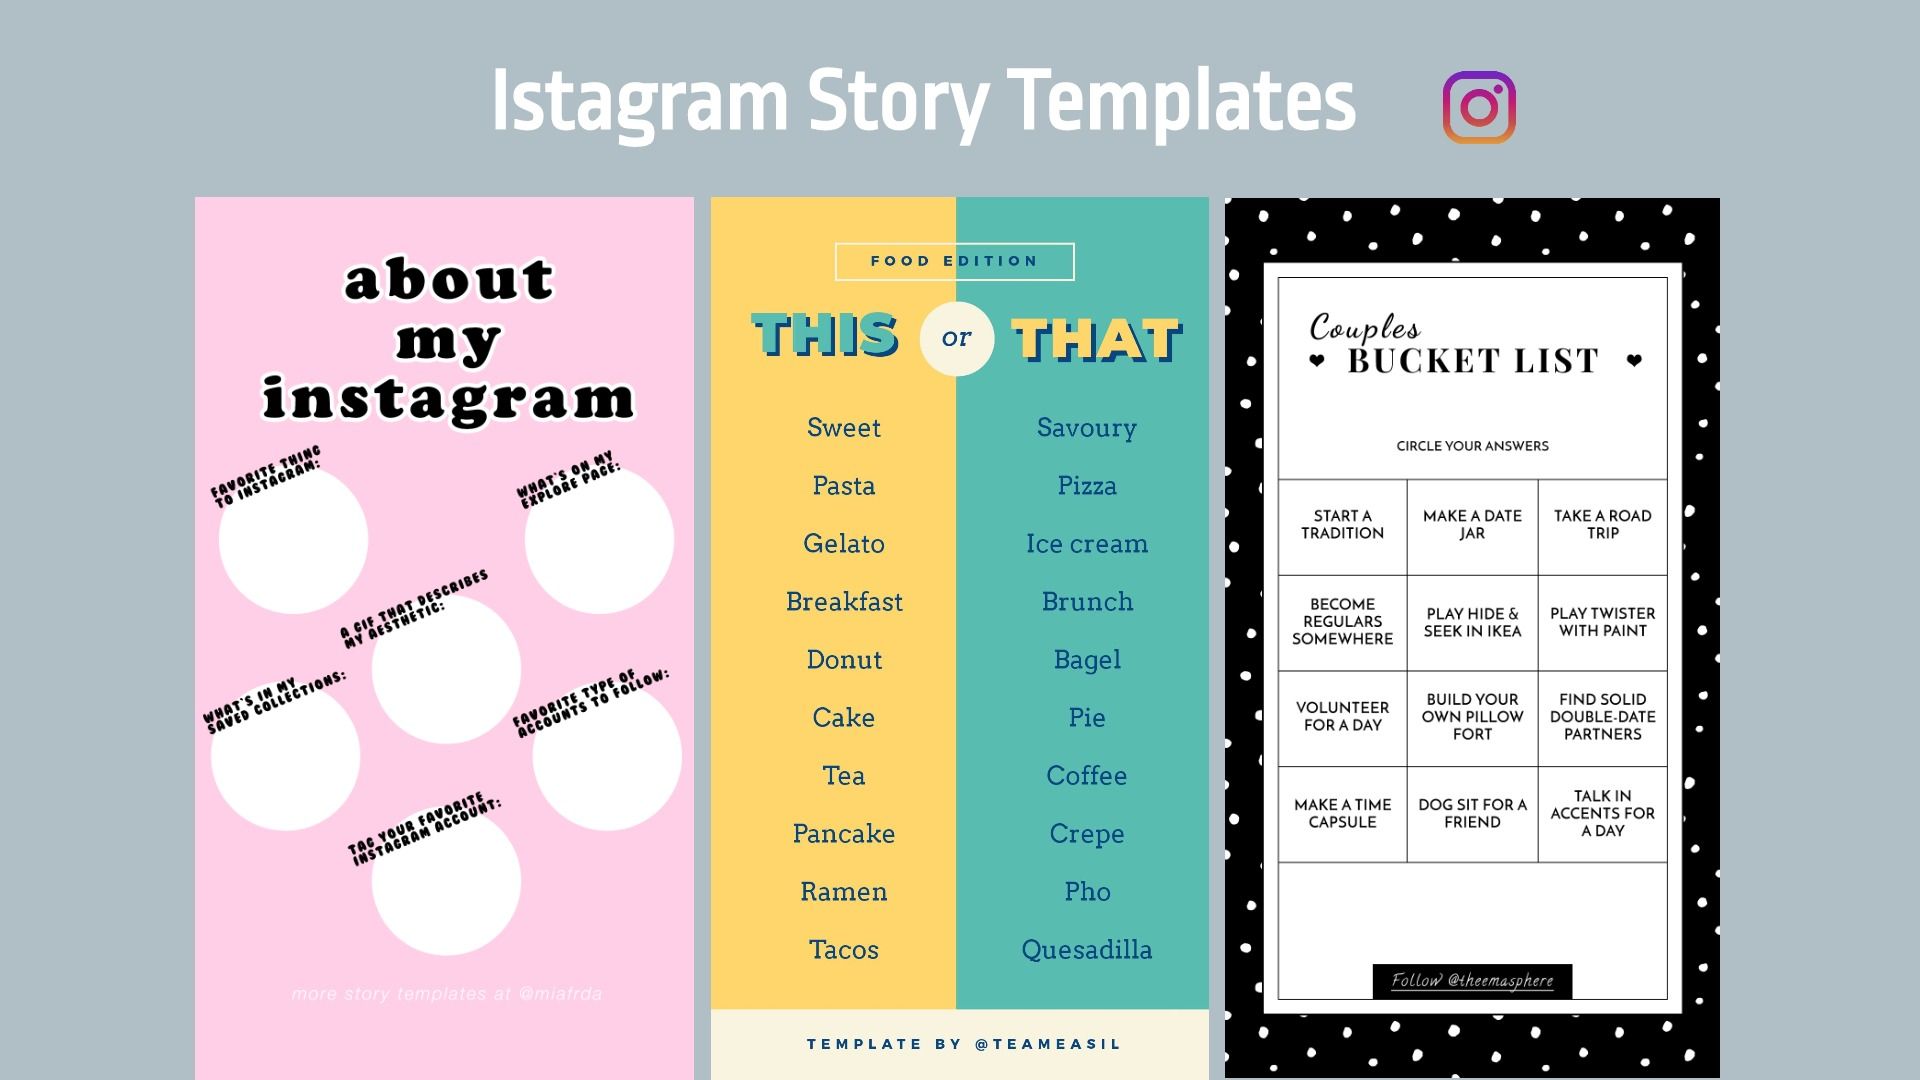 How-to-Make-Your-Own-Instagram-Story-Template.jpg